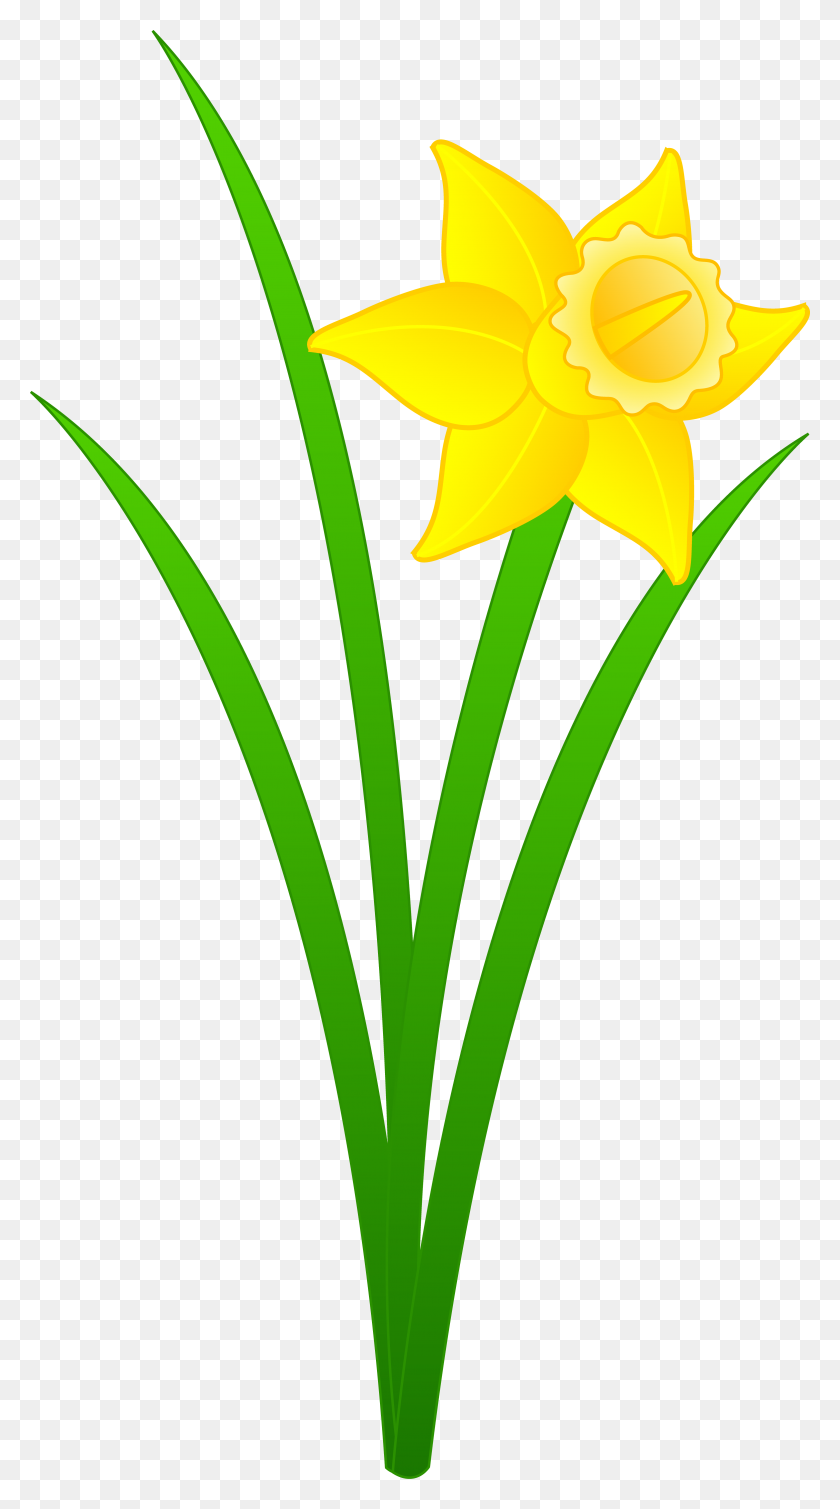 3891x7231 Daffodil Clip Art Look At Daffodil Clip Art Clip Art Images - Real Flower Clipart